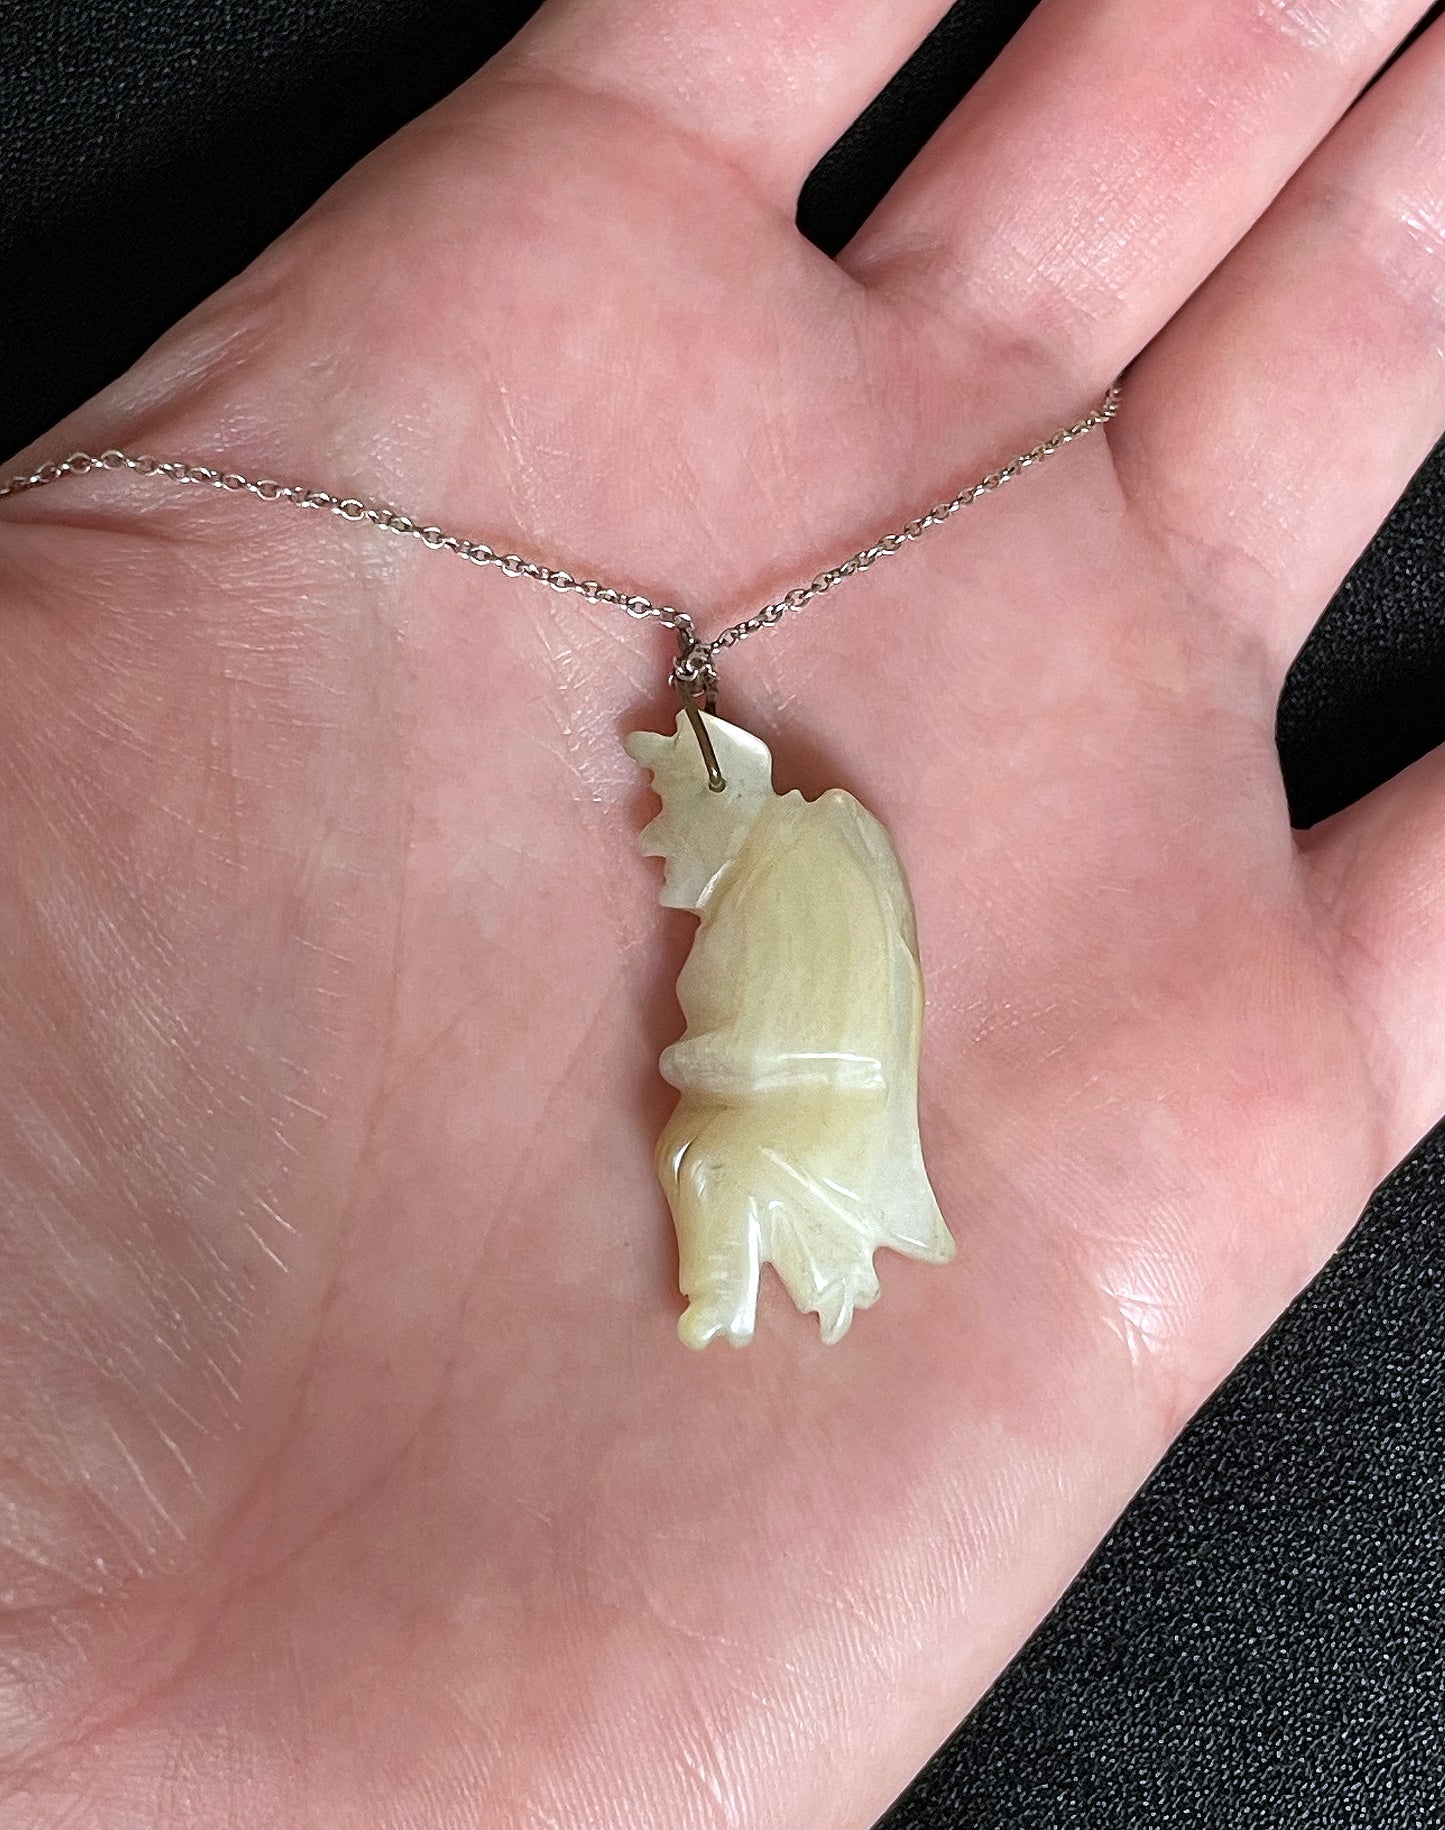 ANTIQUE ITALIAN HAND-CARVED MOTHER OF PEARL GOBBO PENDANT